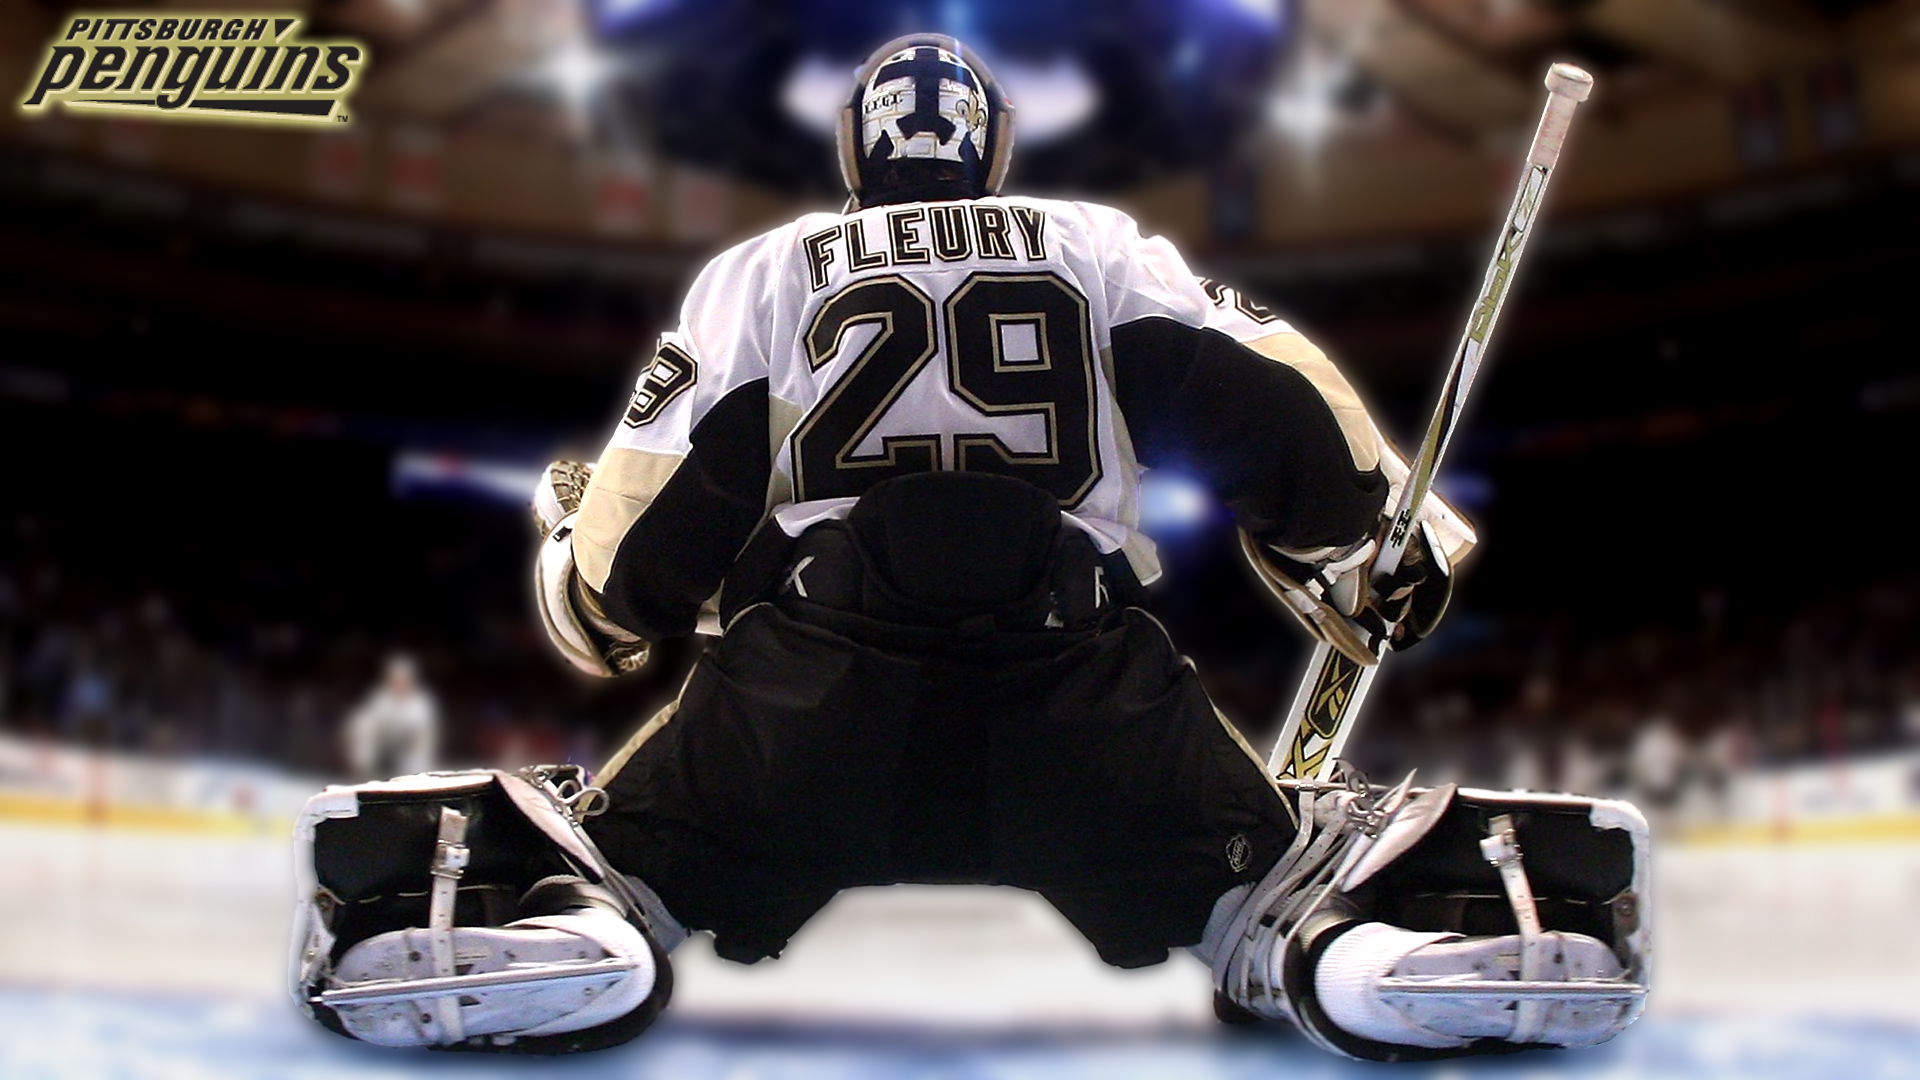 Mike Andre Fleury